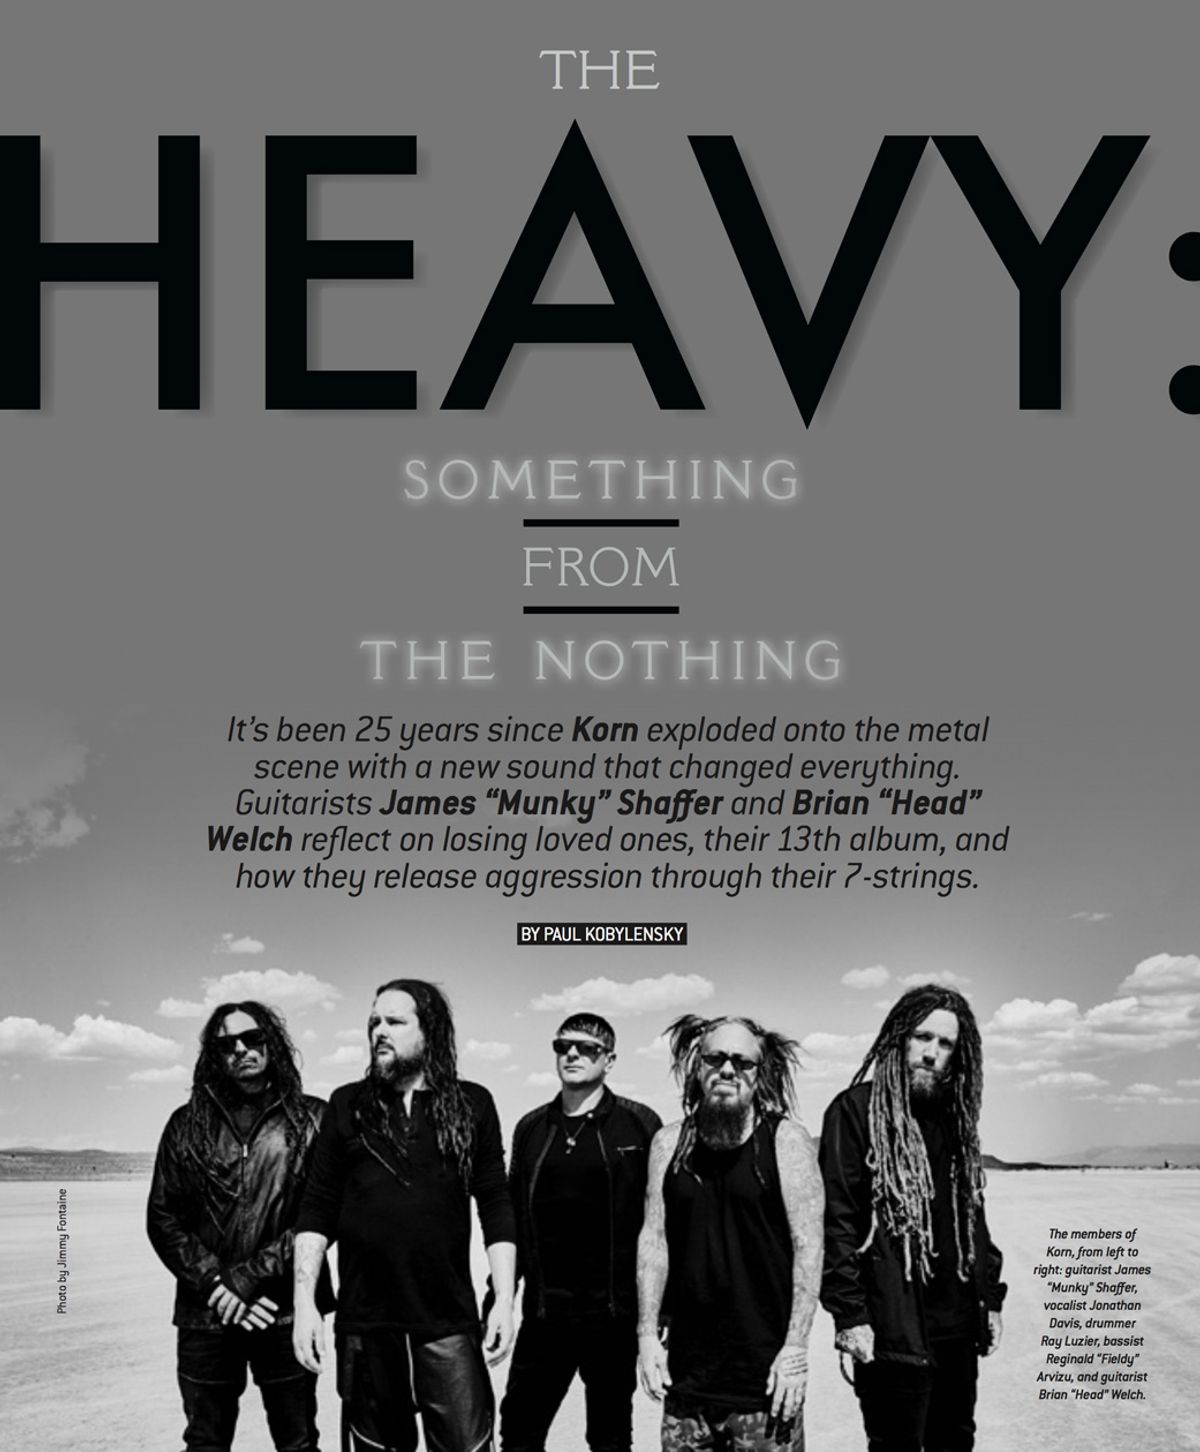 Korn’s Head and Munky on Coping with Tragedy Through 7-Strings